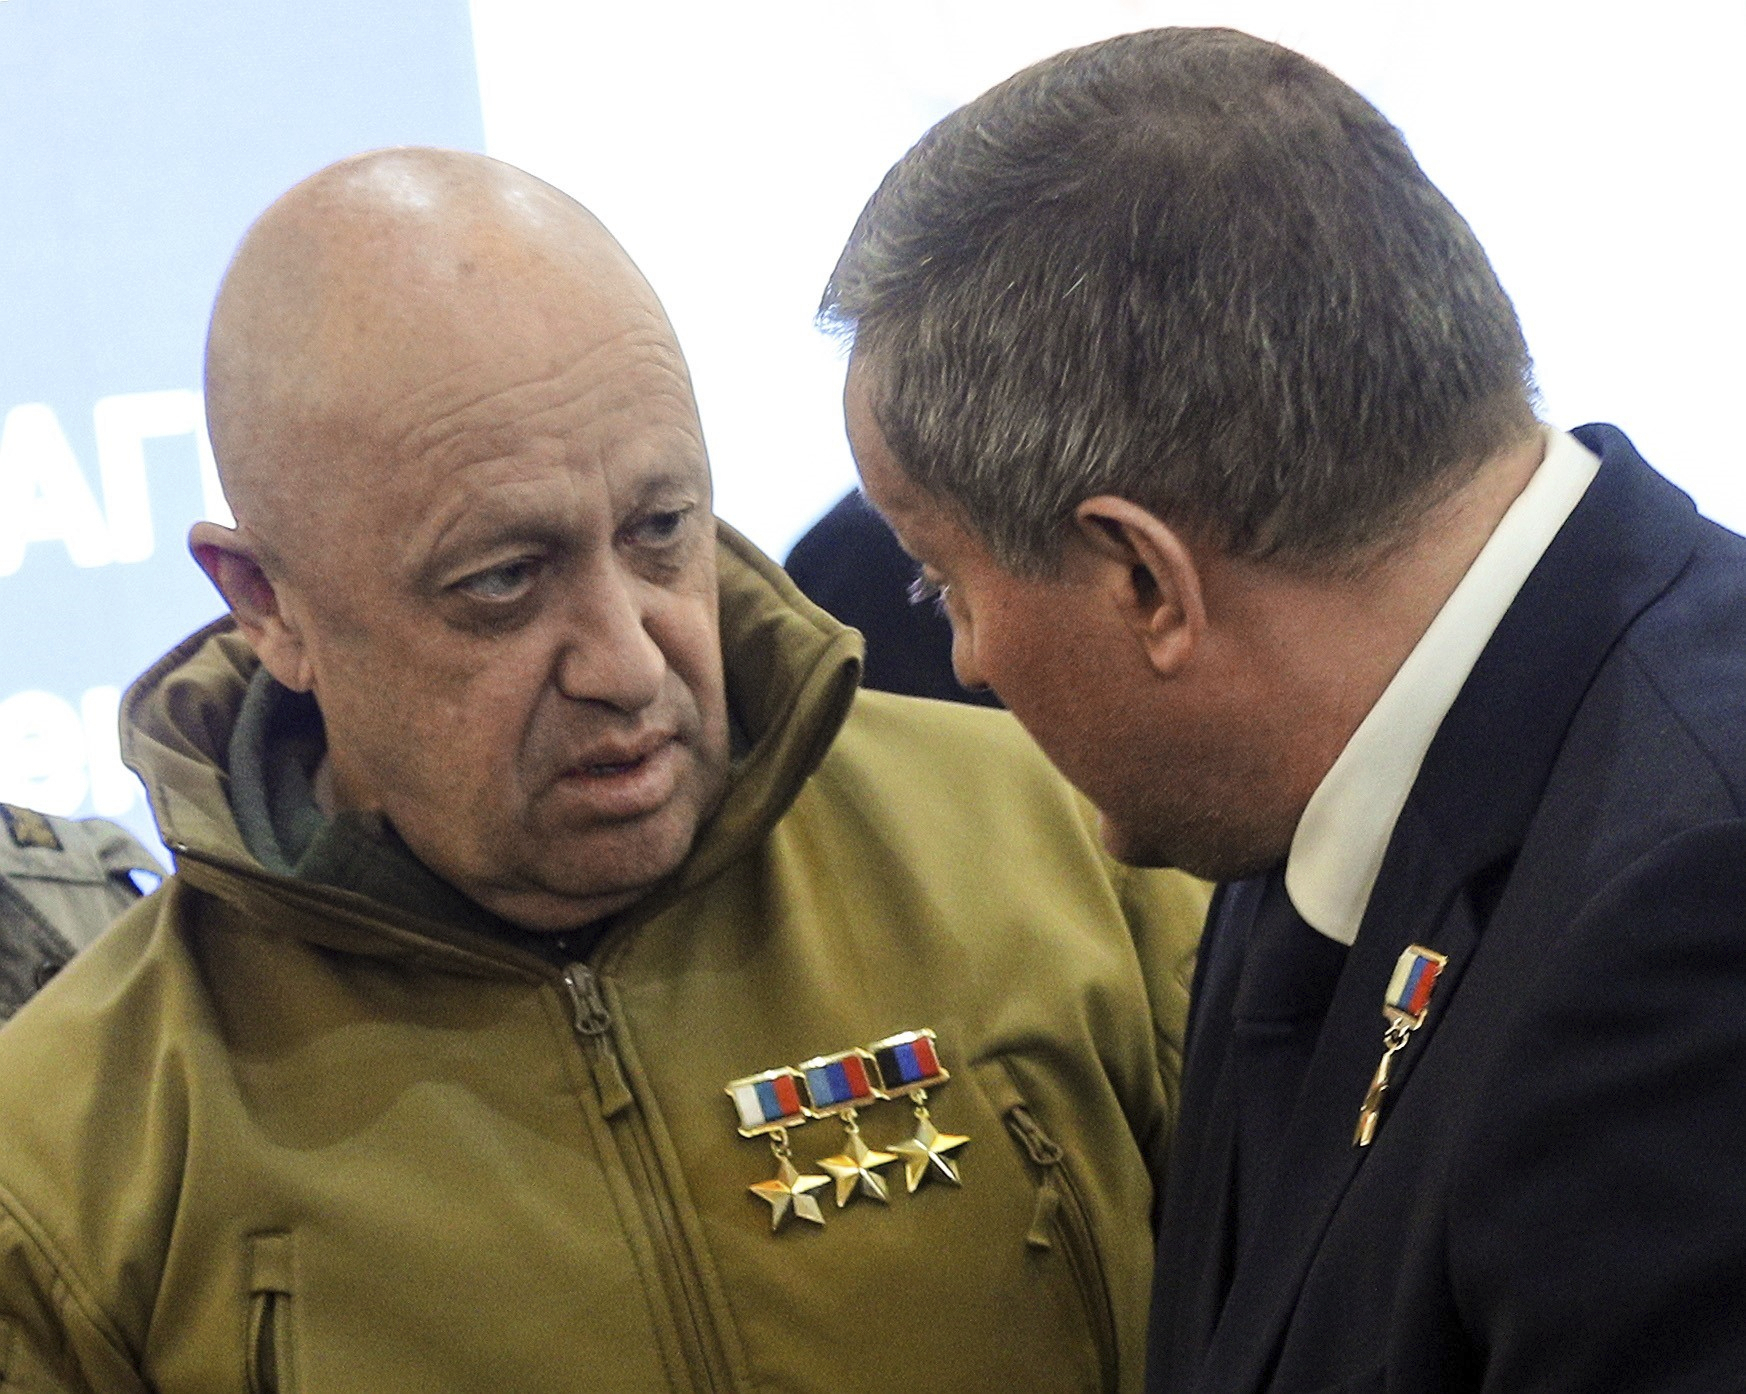 Wagner Group leader Yevgeny Prigozhin, left, and Governor of the Volgograd Region Andrey Bocharov attend a farewell ceremony for Wagner PMC soldier Alexei Nagin in Volgograd, Russia, on September 24.